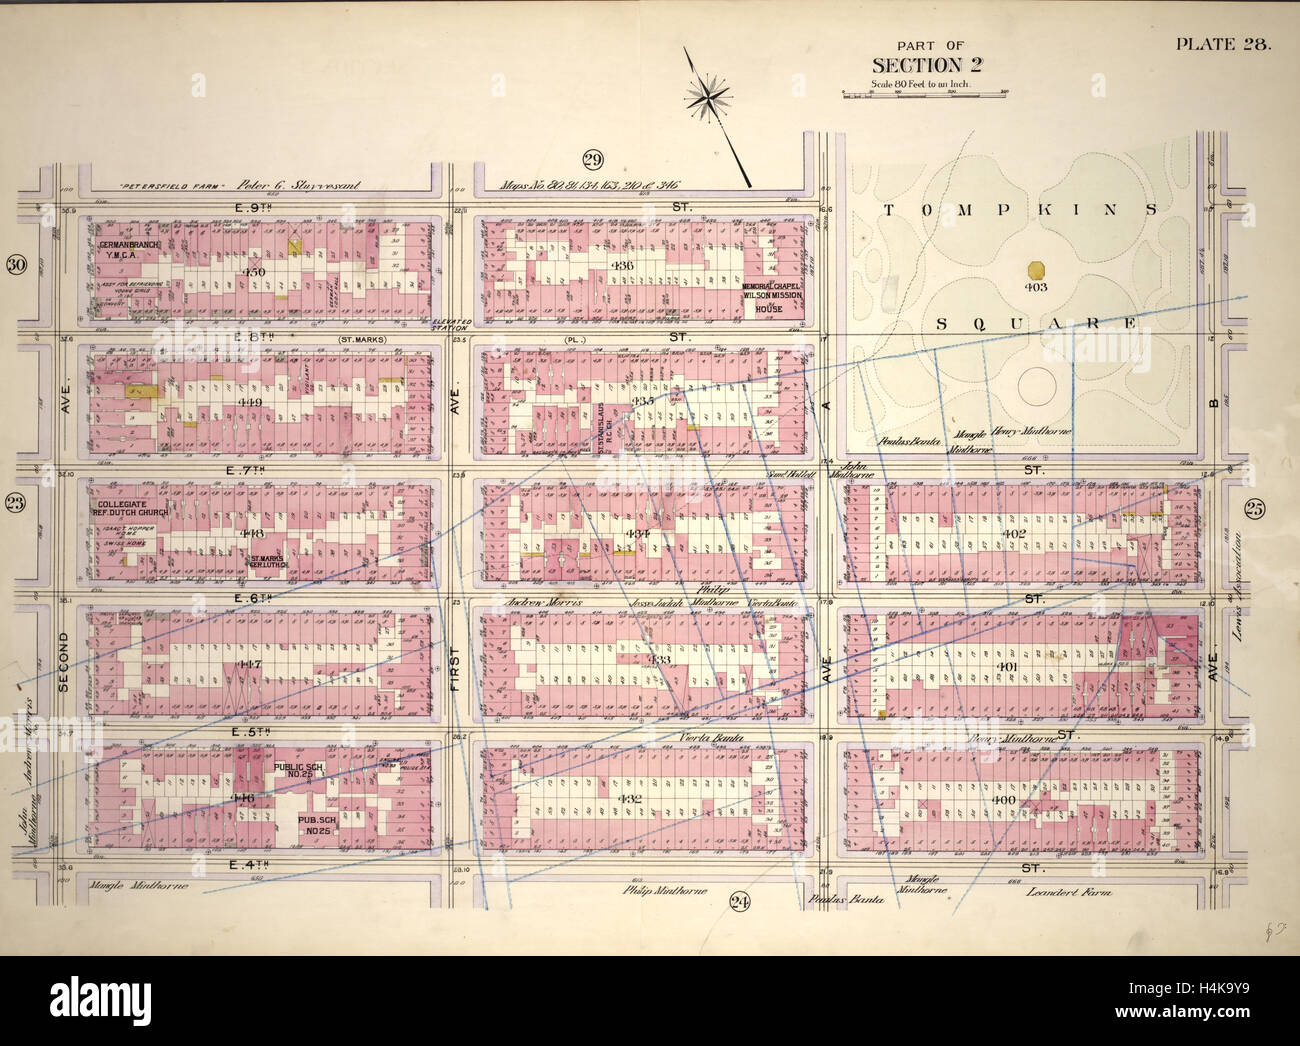 Plate 28, Part of Section 2: Bounded by E. 9th Street, Avenue A, E. 7th Street, Avenue B, E. 14th Street and Second Avenue Stock Photo